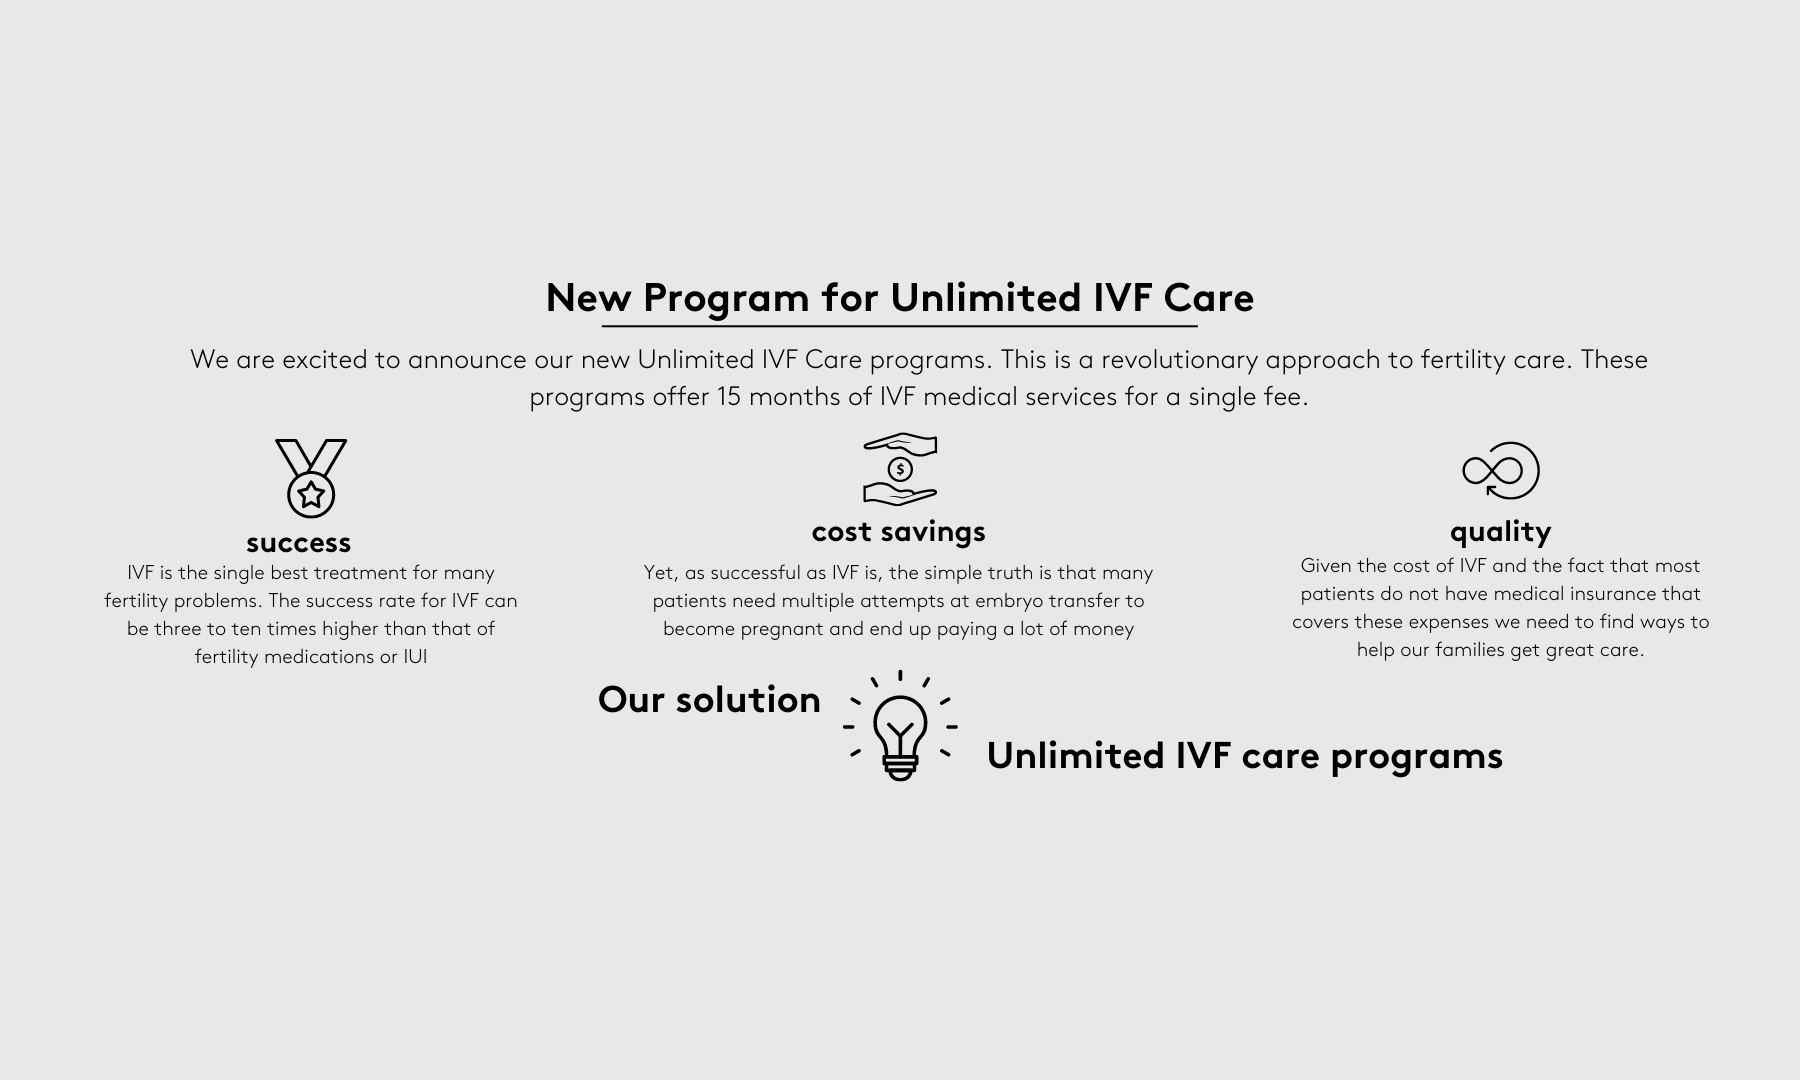 New Mate Fertility program for Unlimited IVF Care